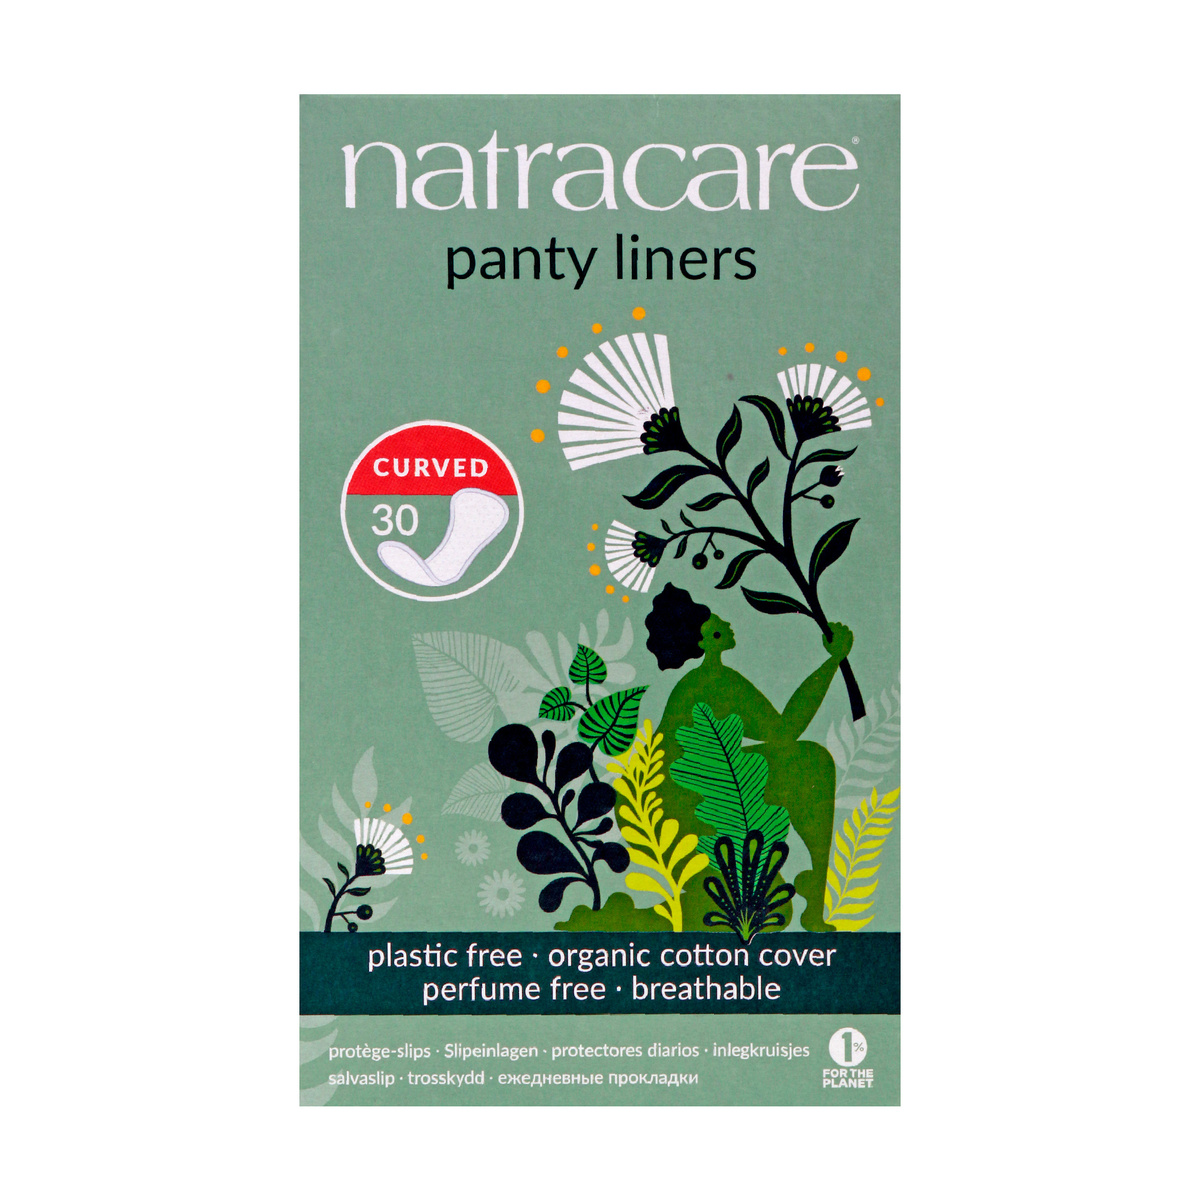 Natracare Panty Liners Curved 30pcs